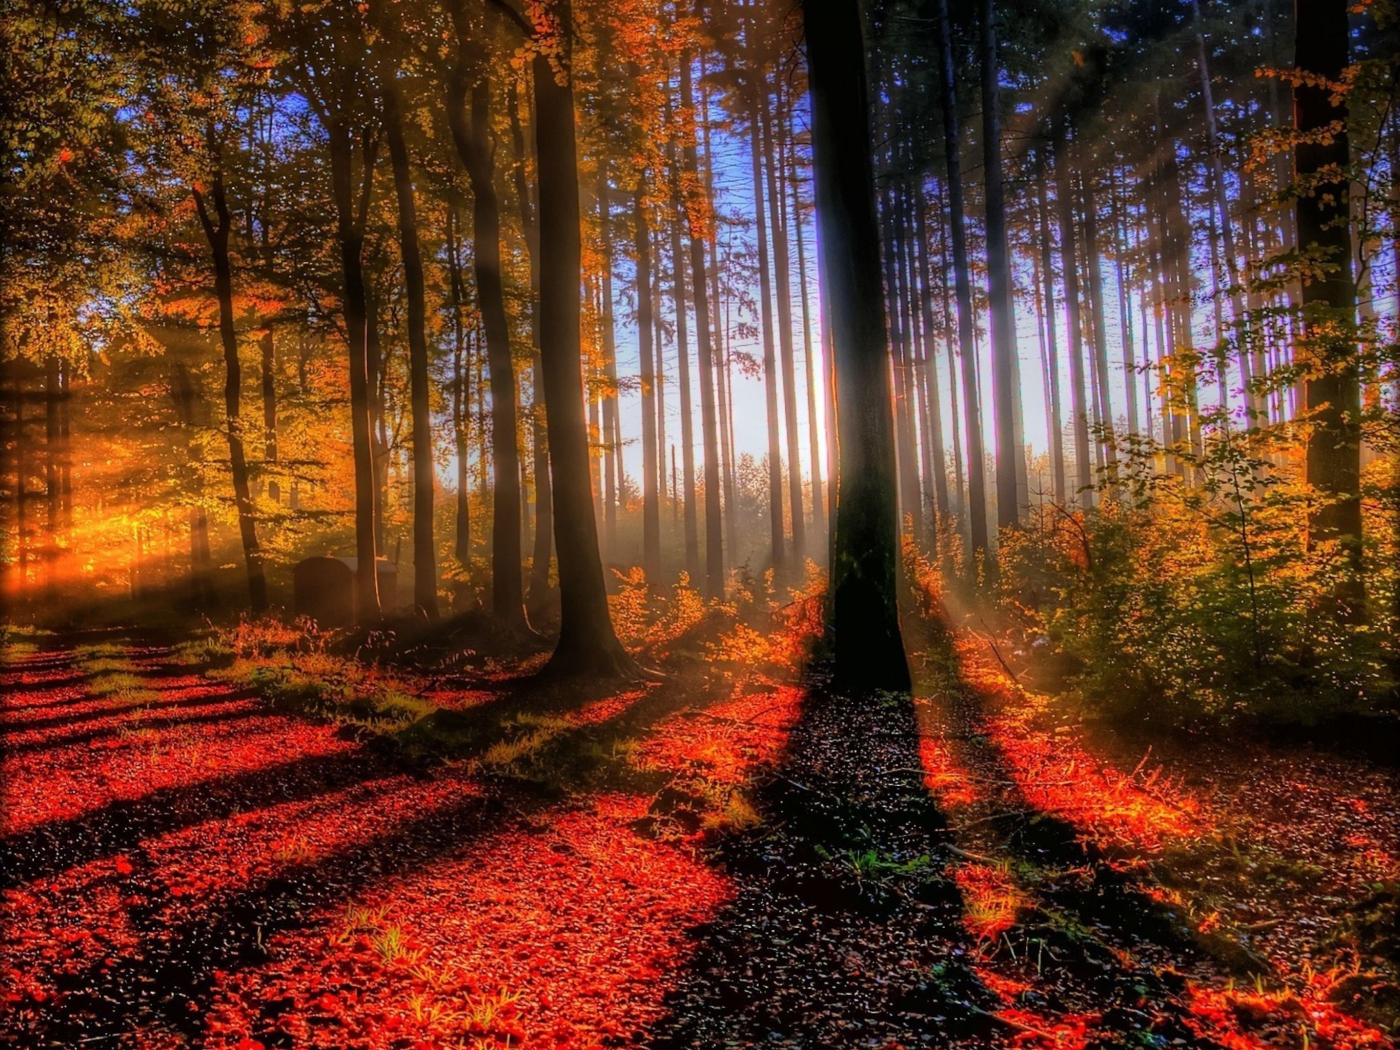 Awesome Fall Scenery wallpaper 1400x1050